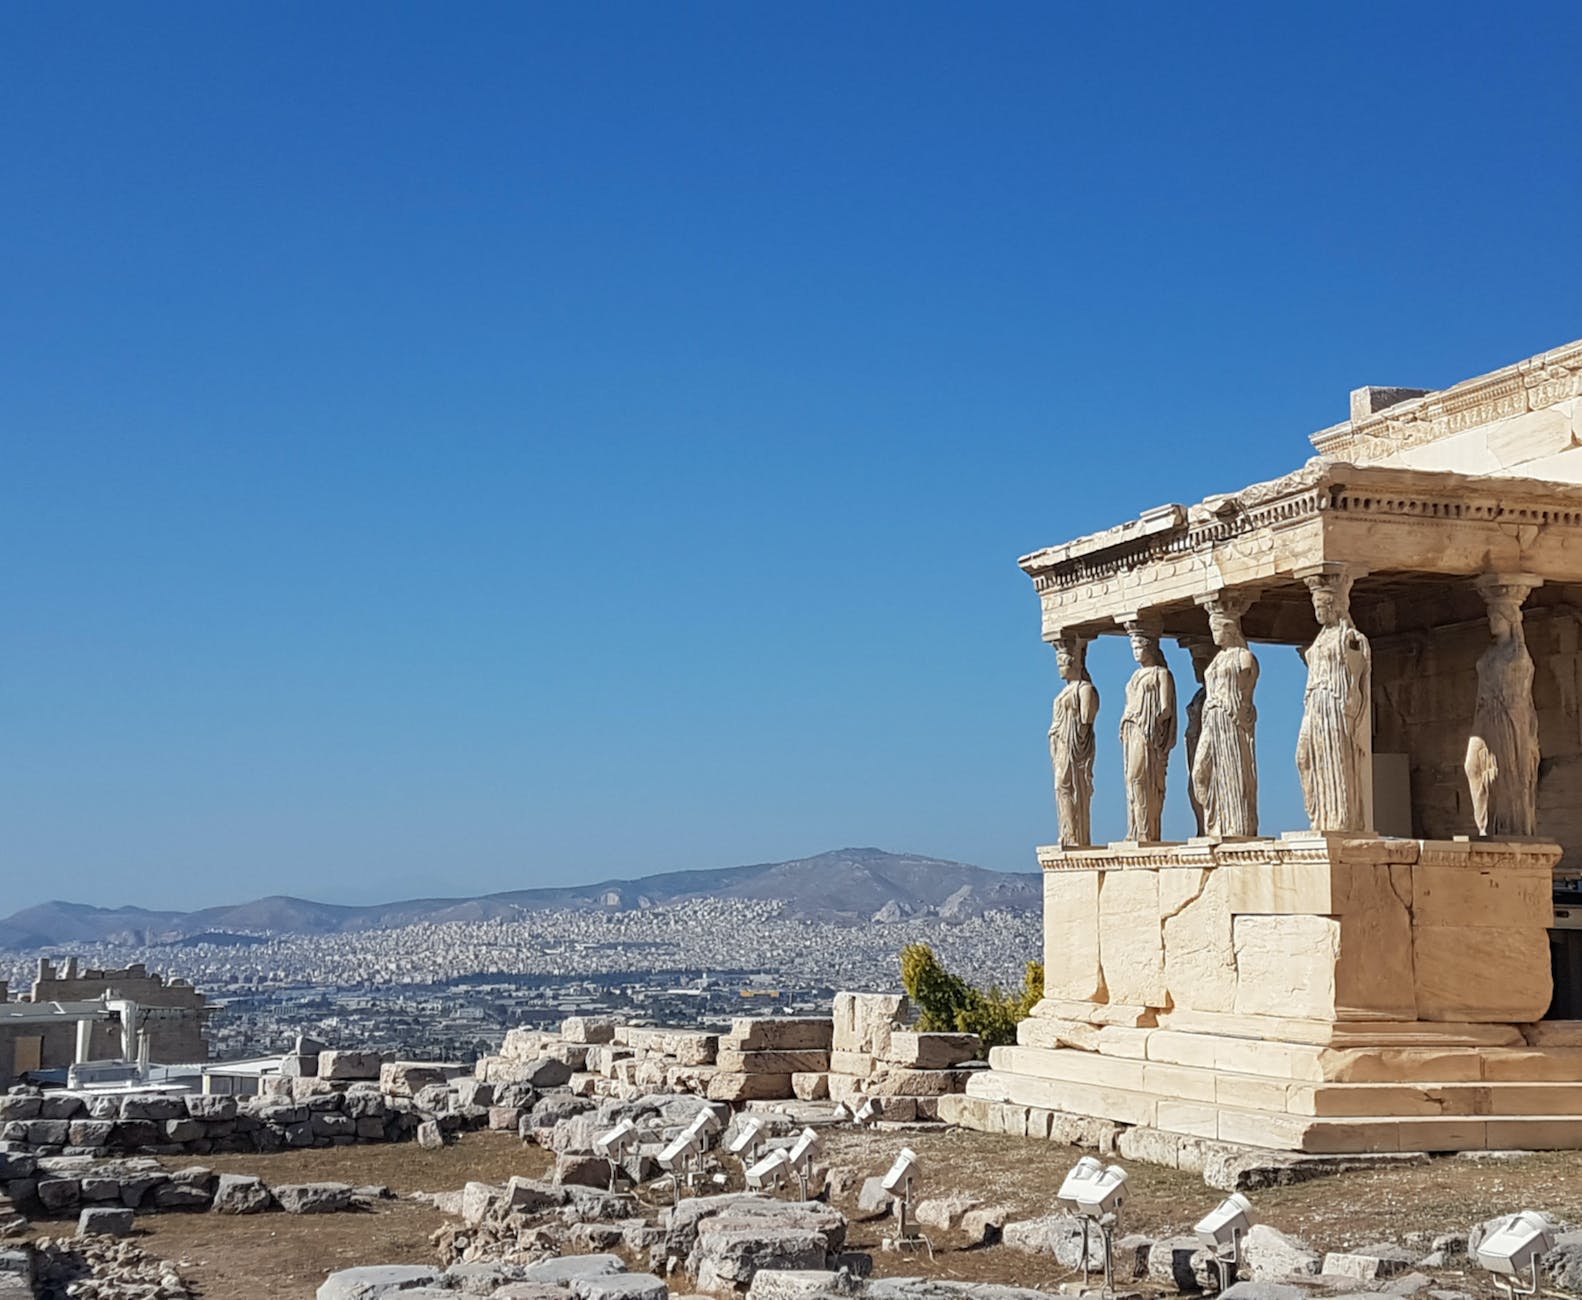 the historical ancient acropolis temple of parthenon in greece